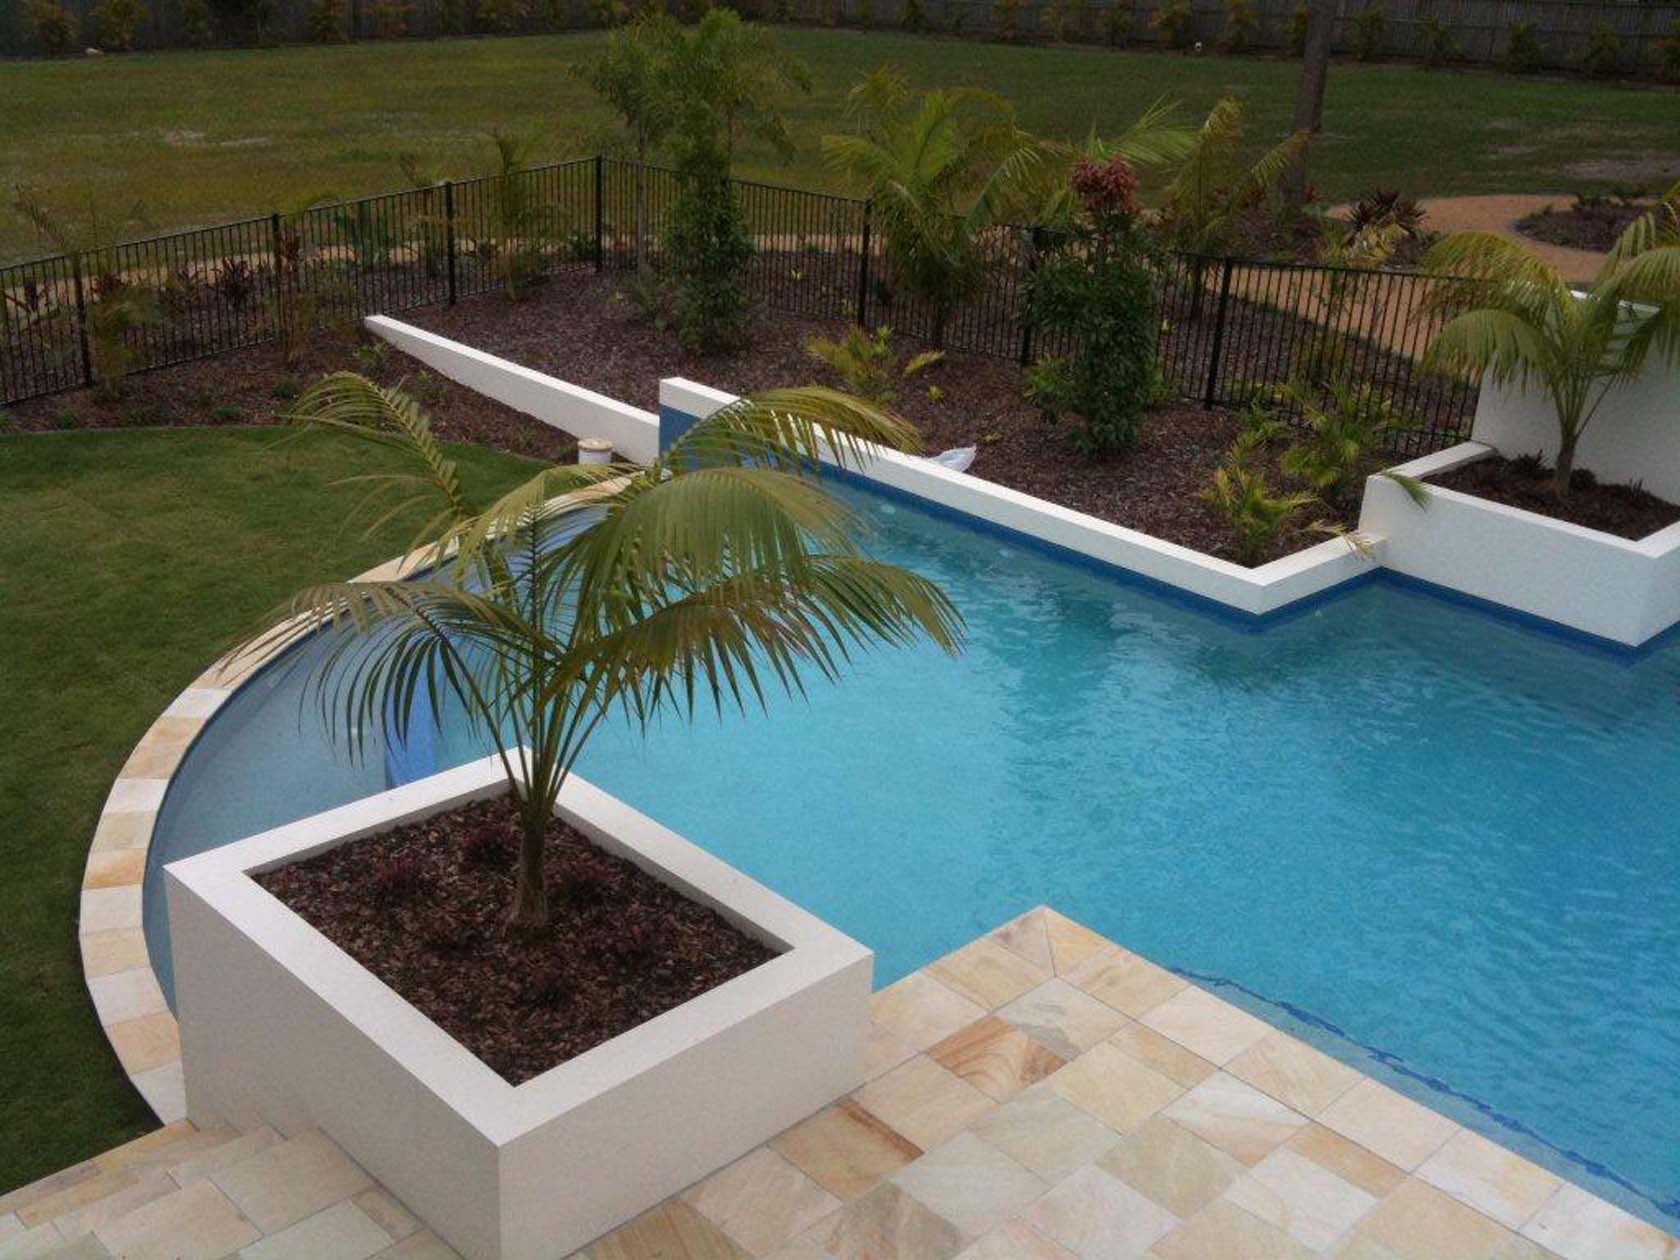 Natural Himalayan Sandstone pool coping and surround tiles